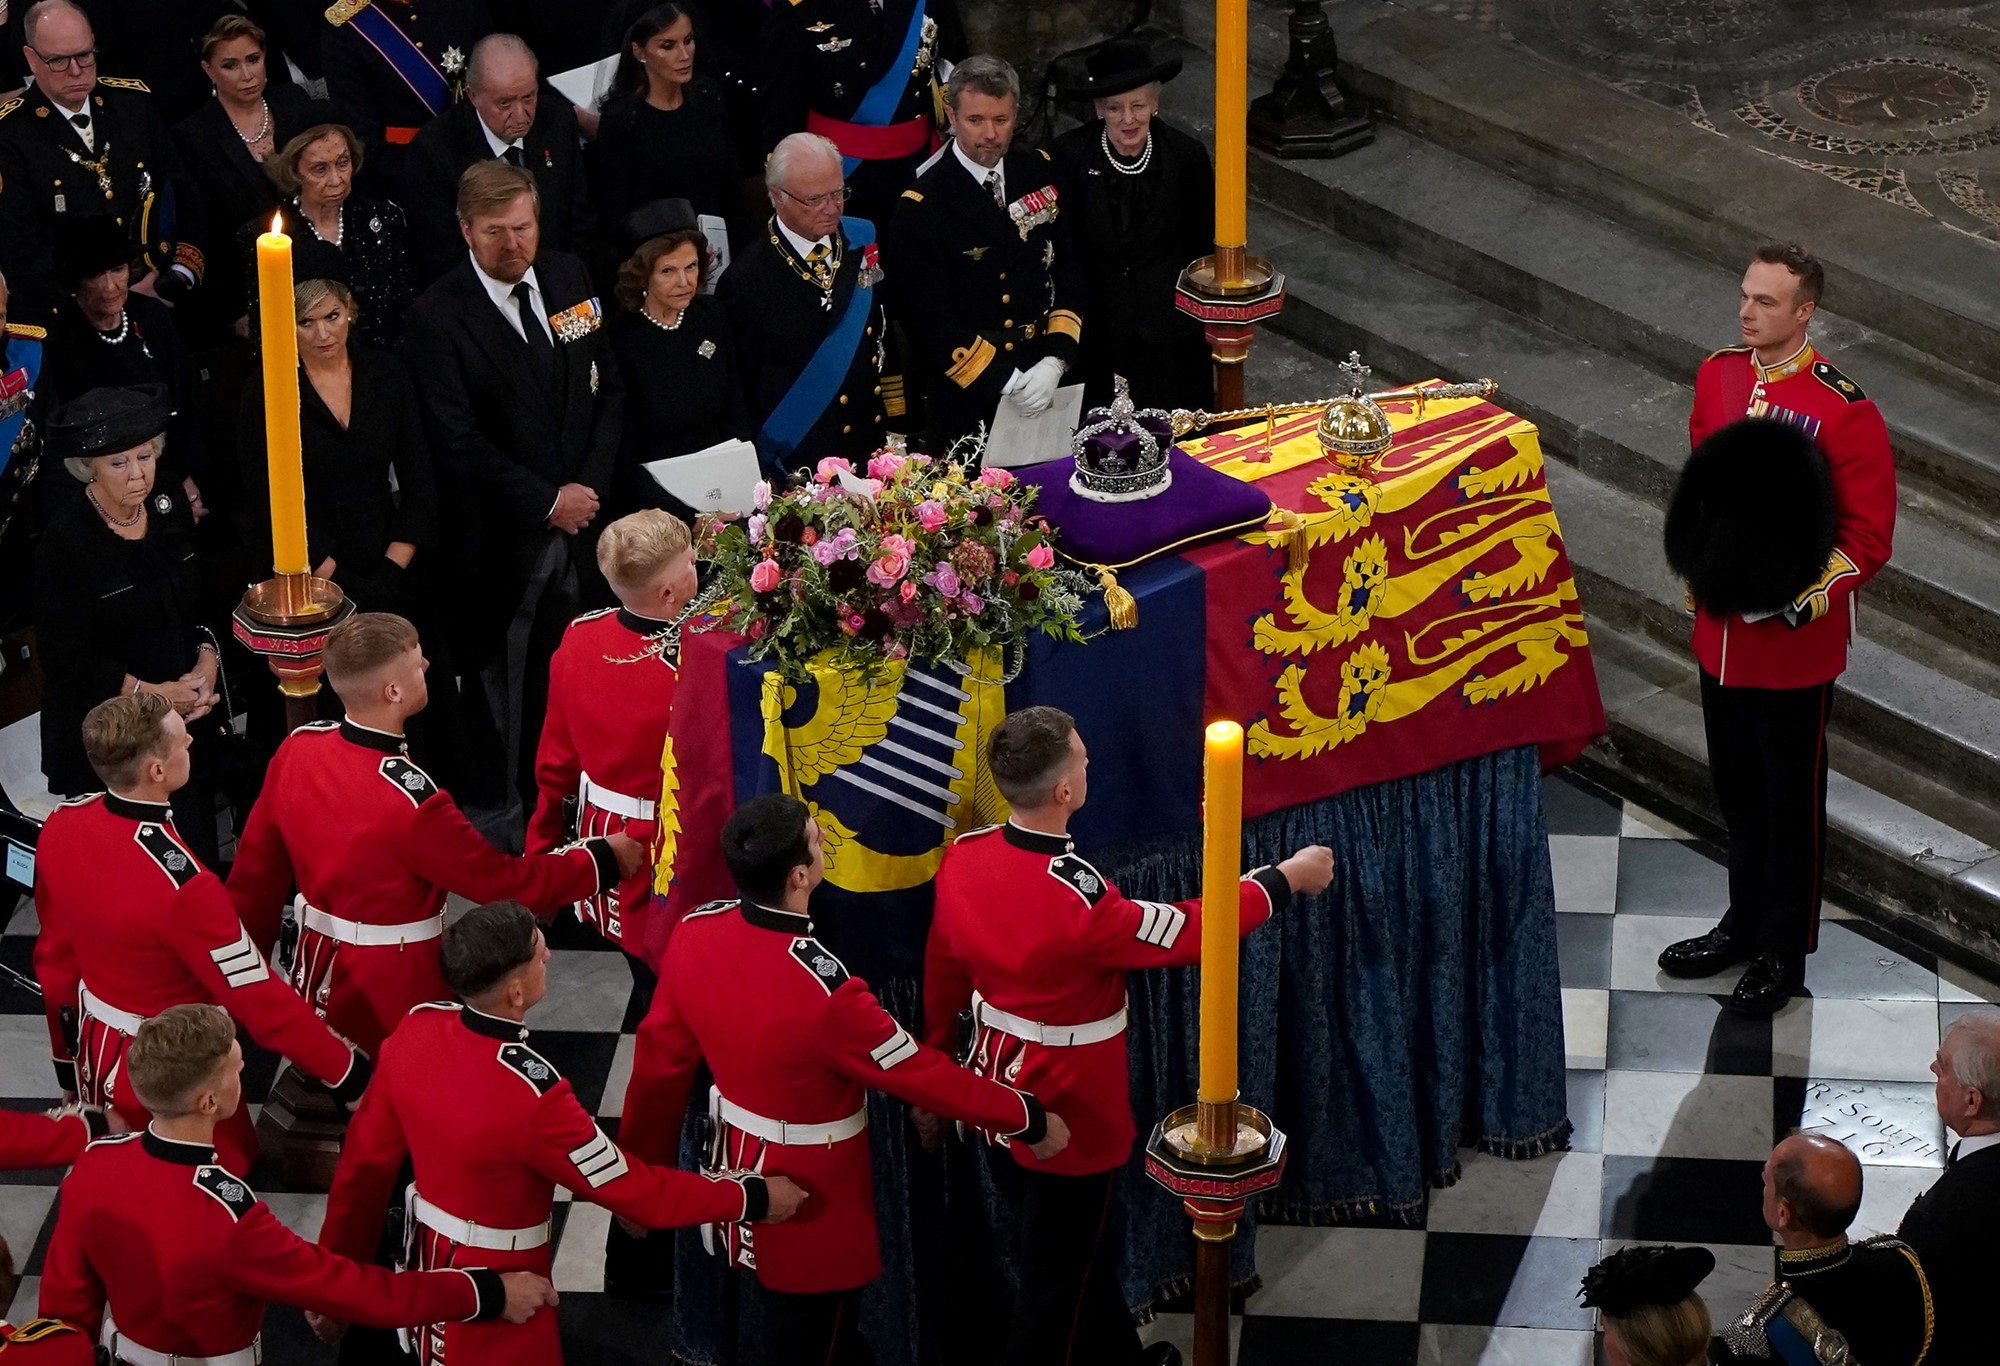 The Queens coffin lies in the middle of the room with men marching around it